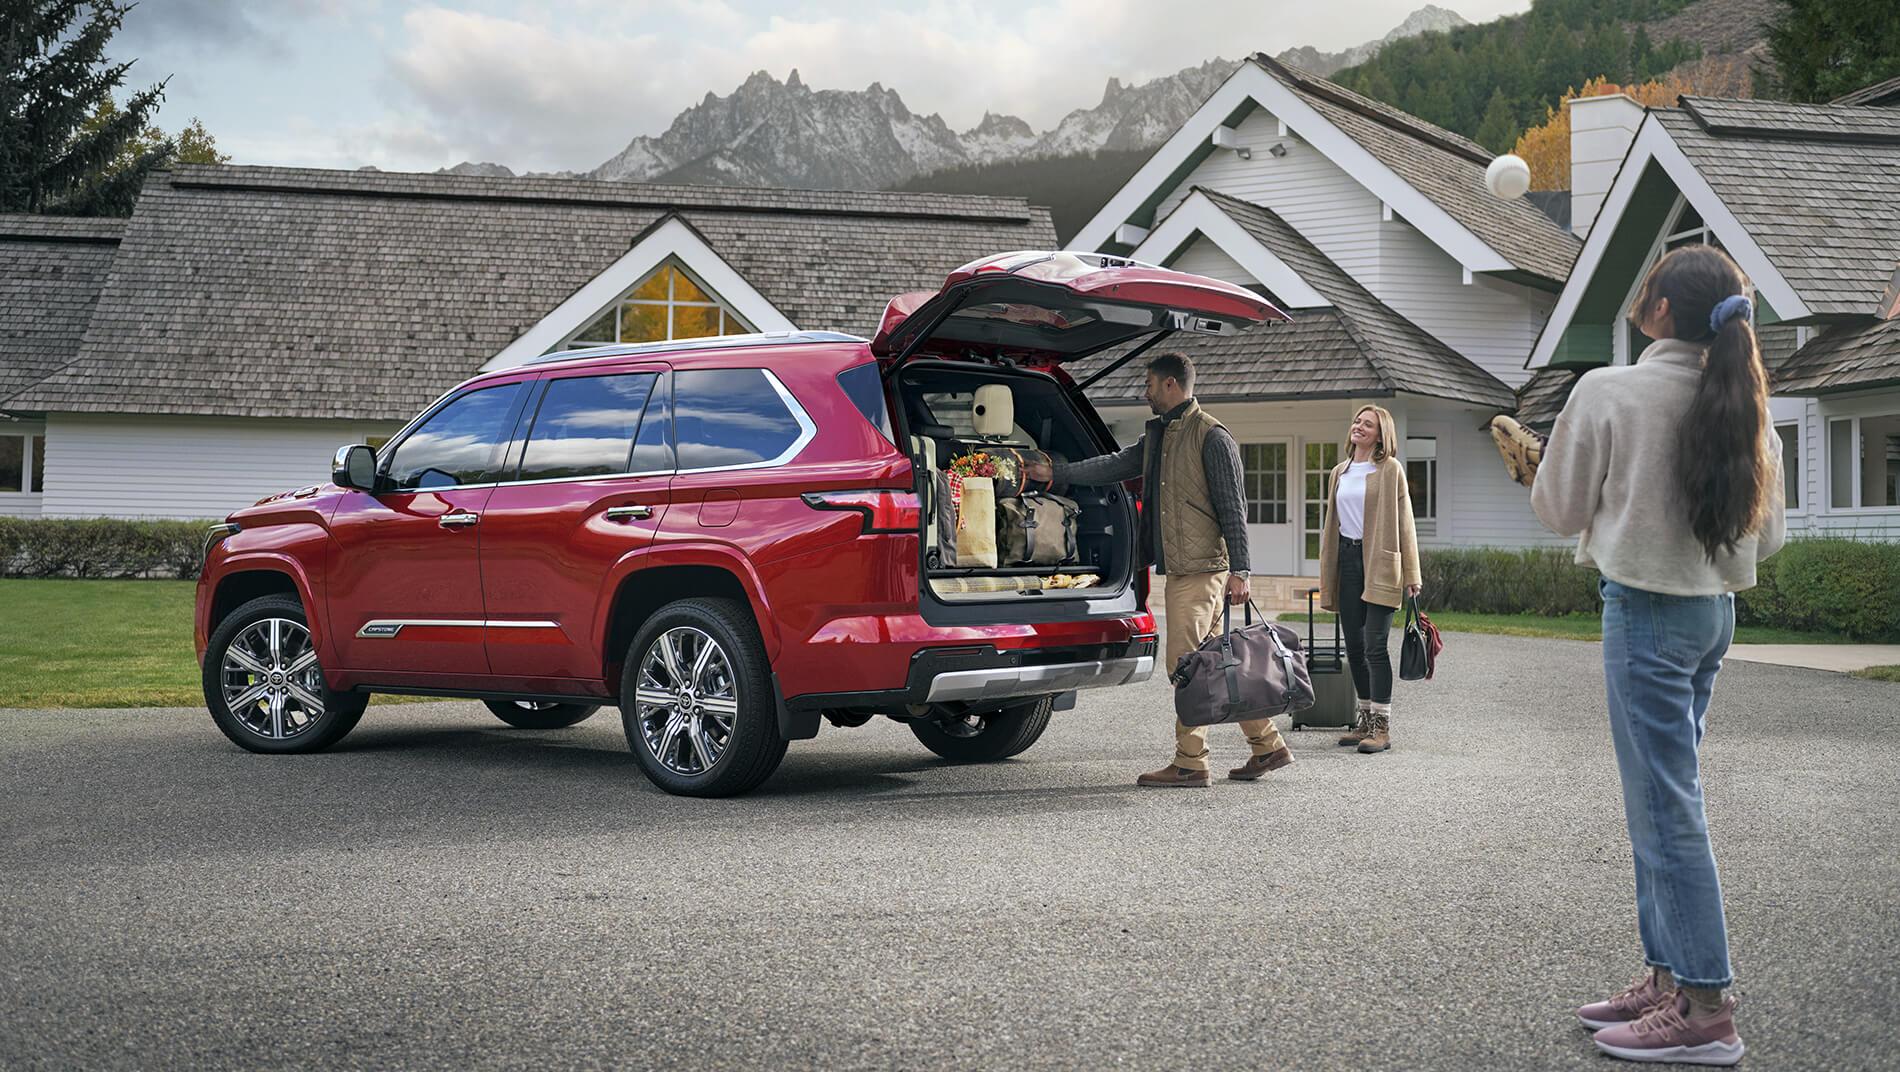 family loading luggage into large cargo space of a red Toyota Sequoia